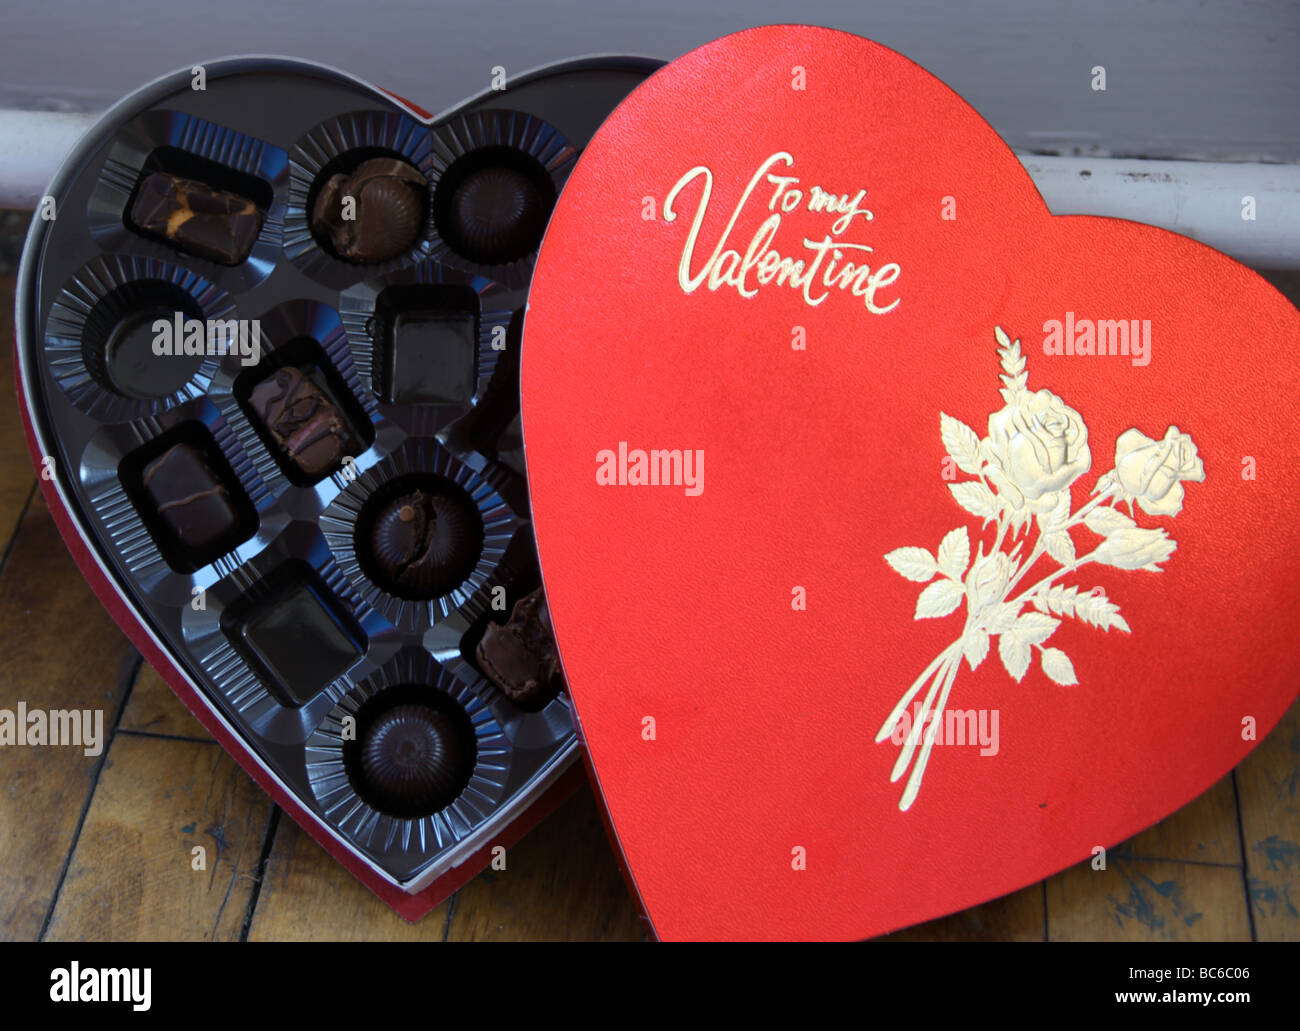 Box of valentine's day chocolates, some of which have been eaten. Stock Photo